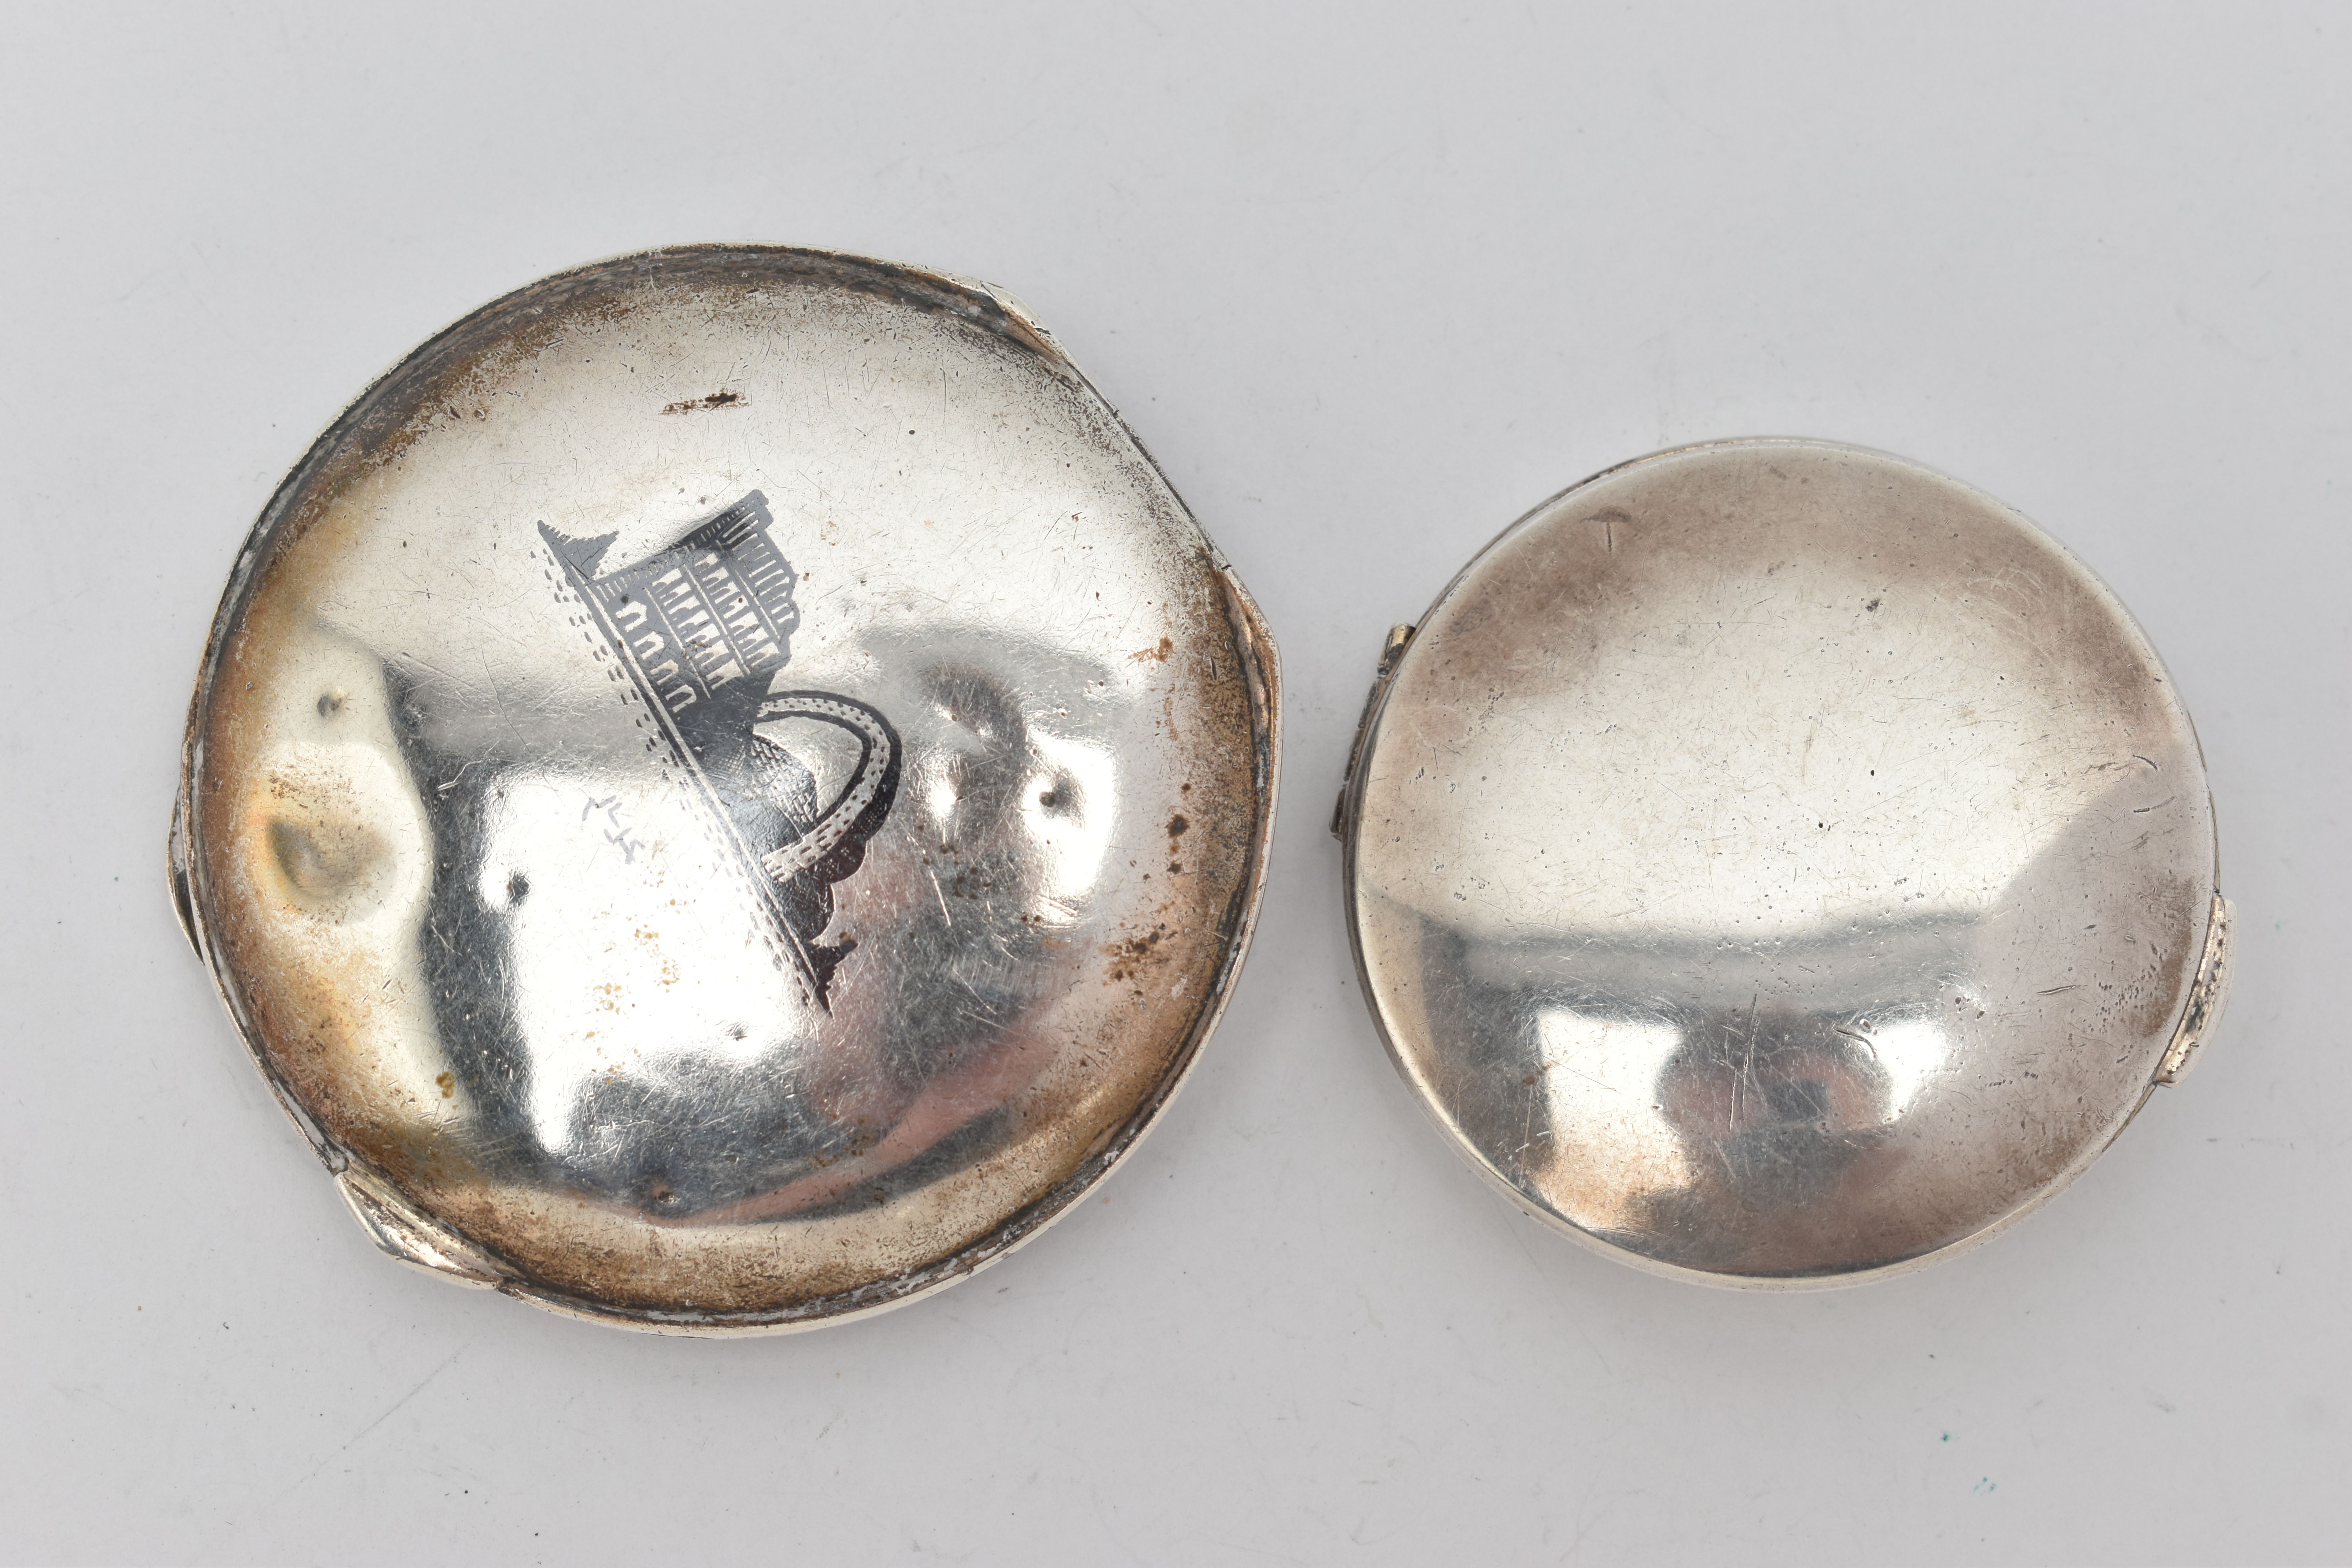 TWO COMPACTS, to include a silver 'Kigu' round polished compact, hallmarked 'Kigu Ltd' Birmingham - Image 2 of 4